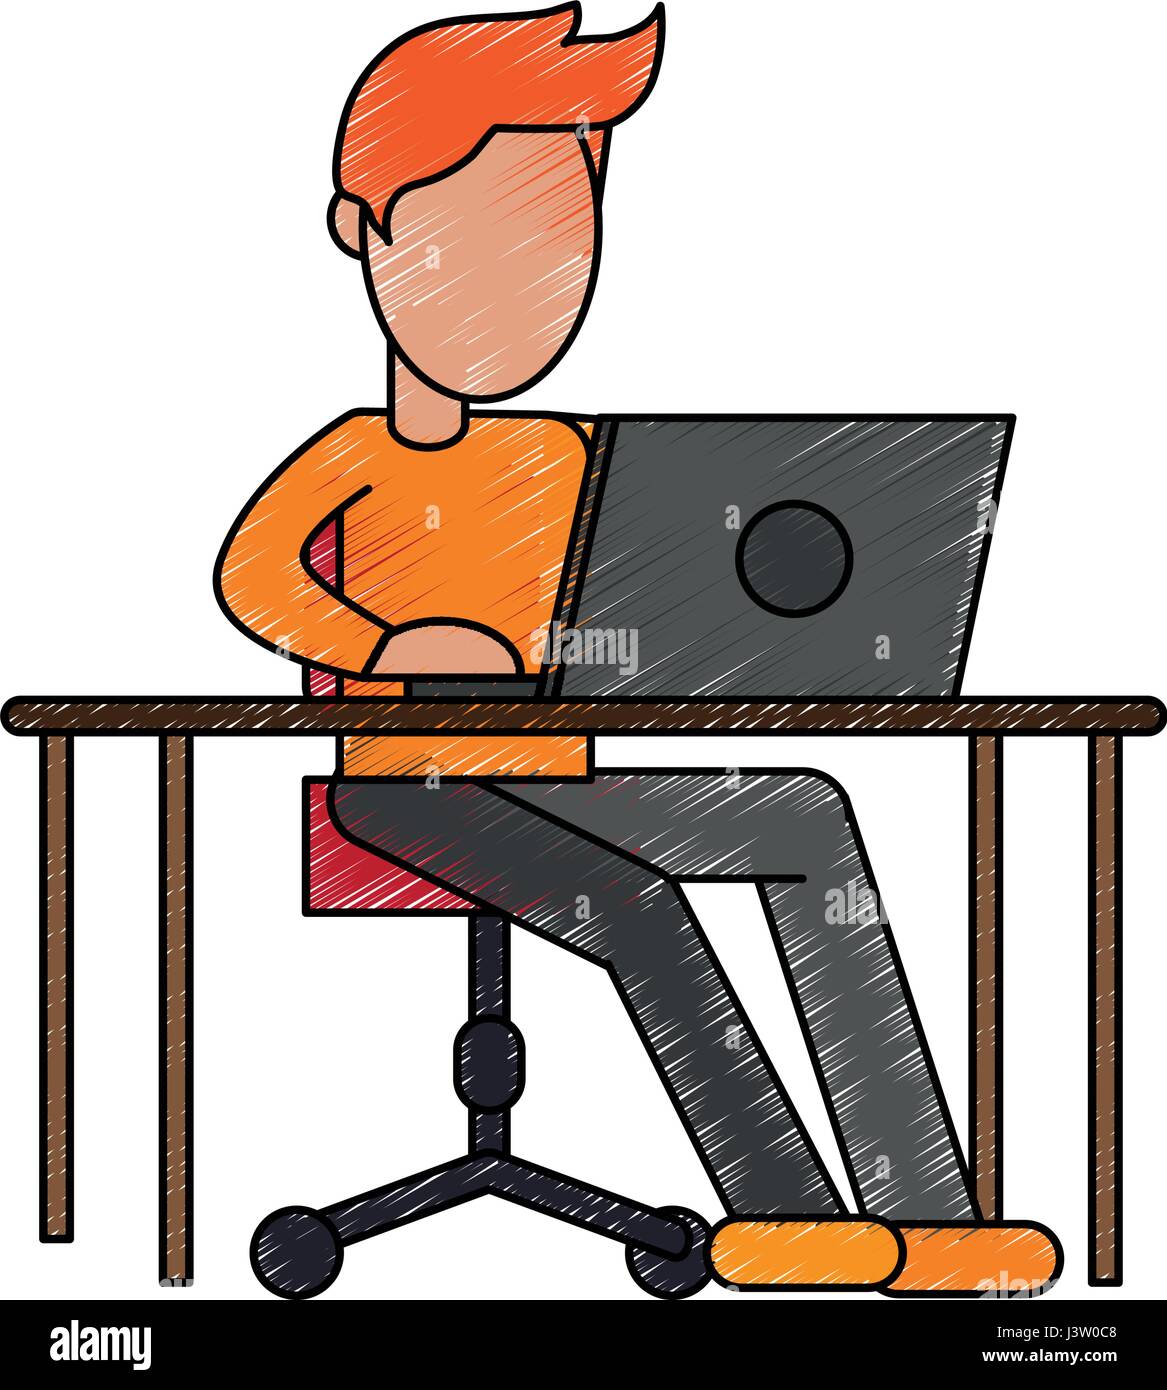 Color Pencil Image Cartoon Faceless Man Sitting In Desk With